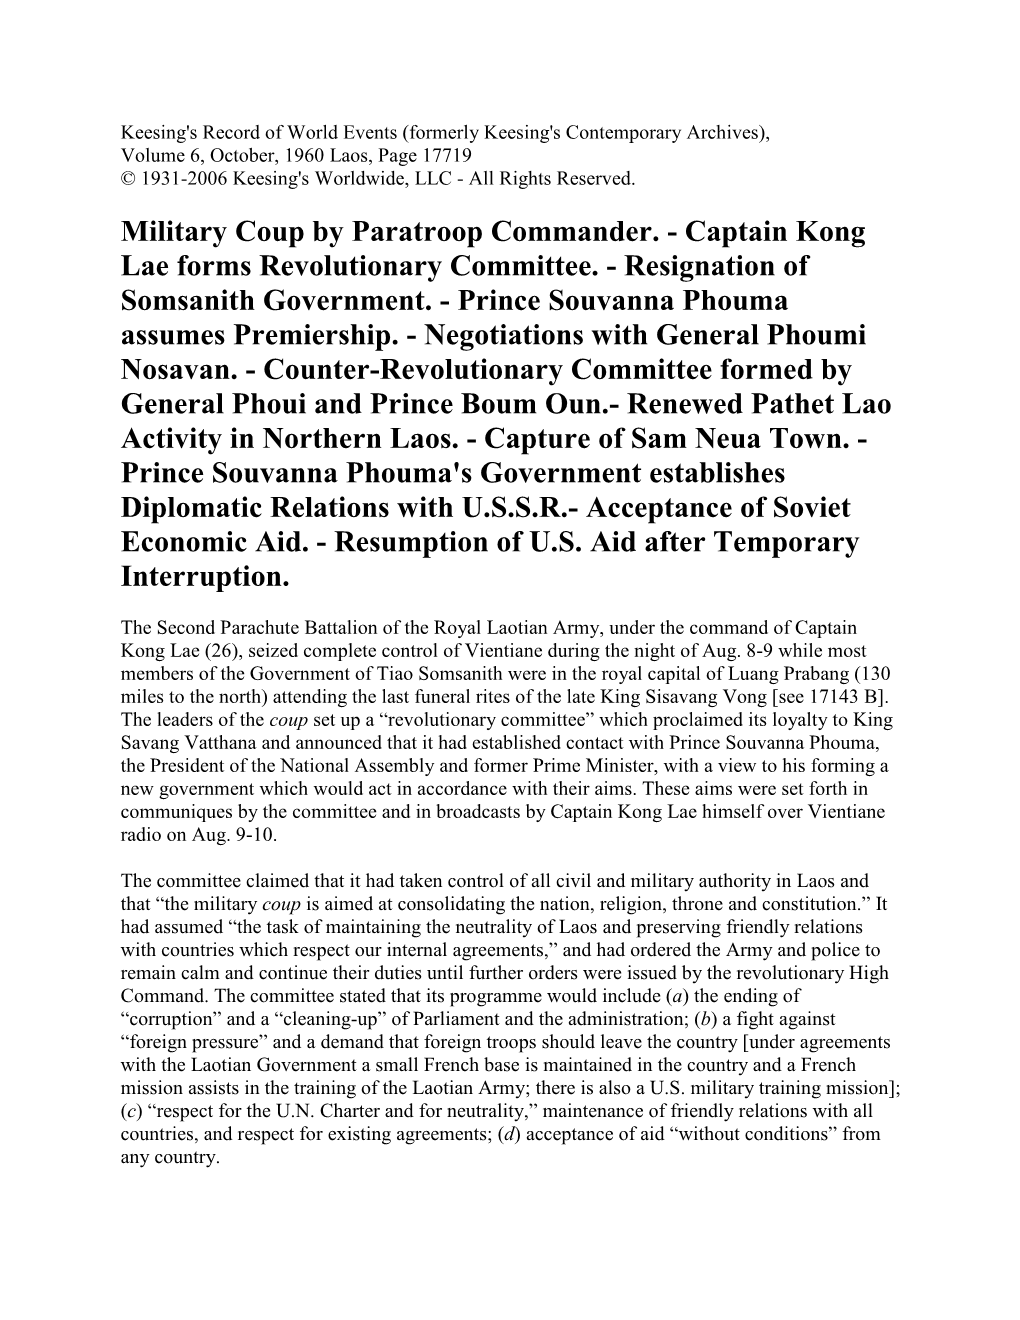 Military Coup by Paratroop Commander. - Captain Kong Lae Forms Revolutionary Committee